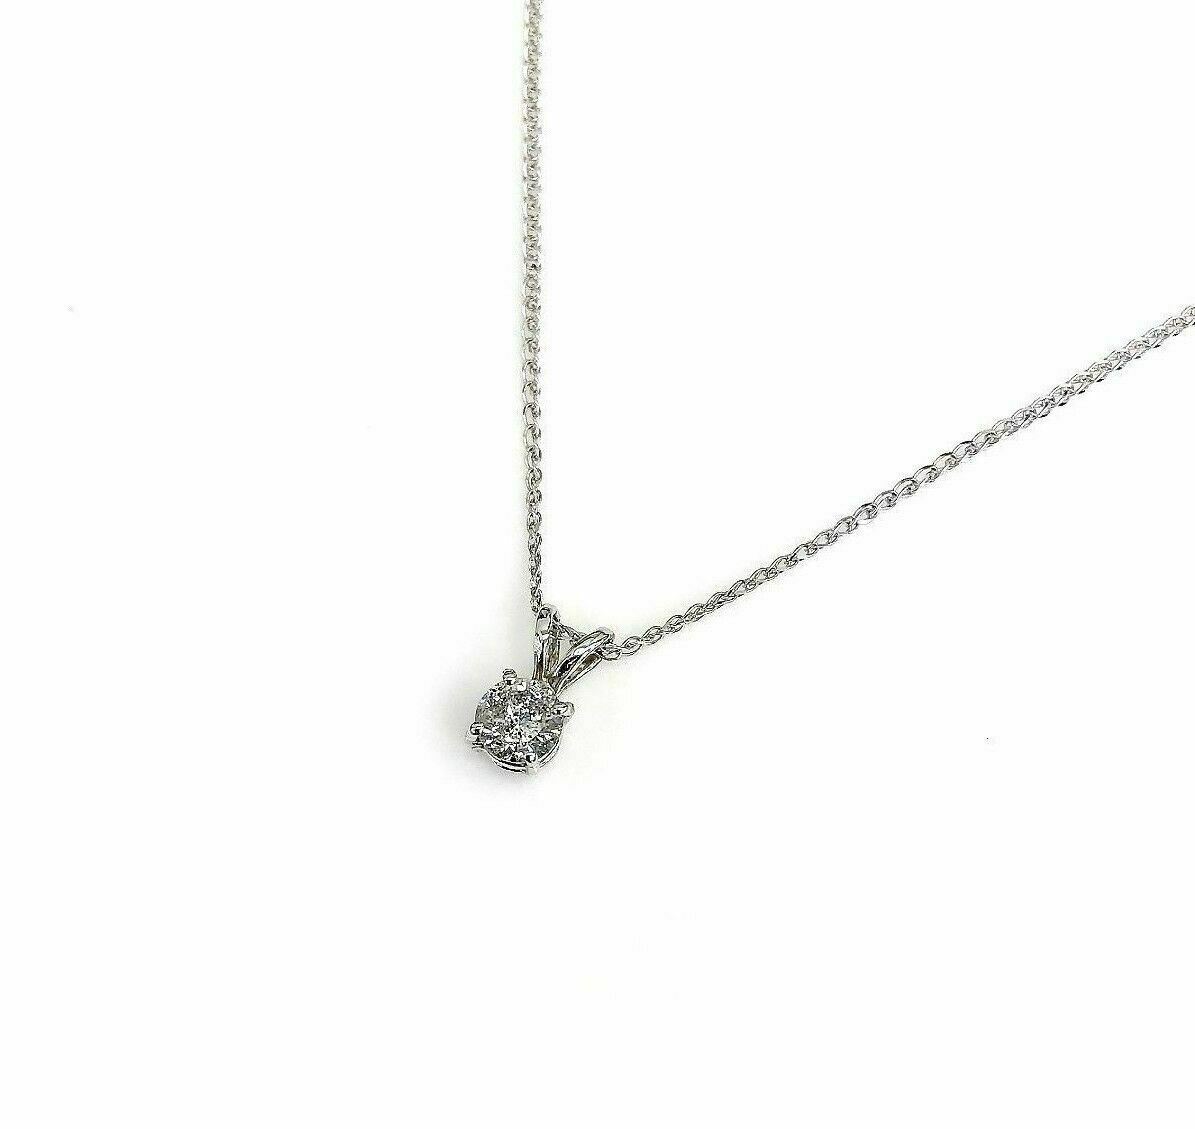 0.55 Carat Round Diamond Solitaire Pendant with 14K White Gold Chain